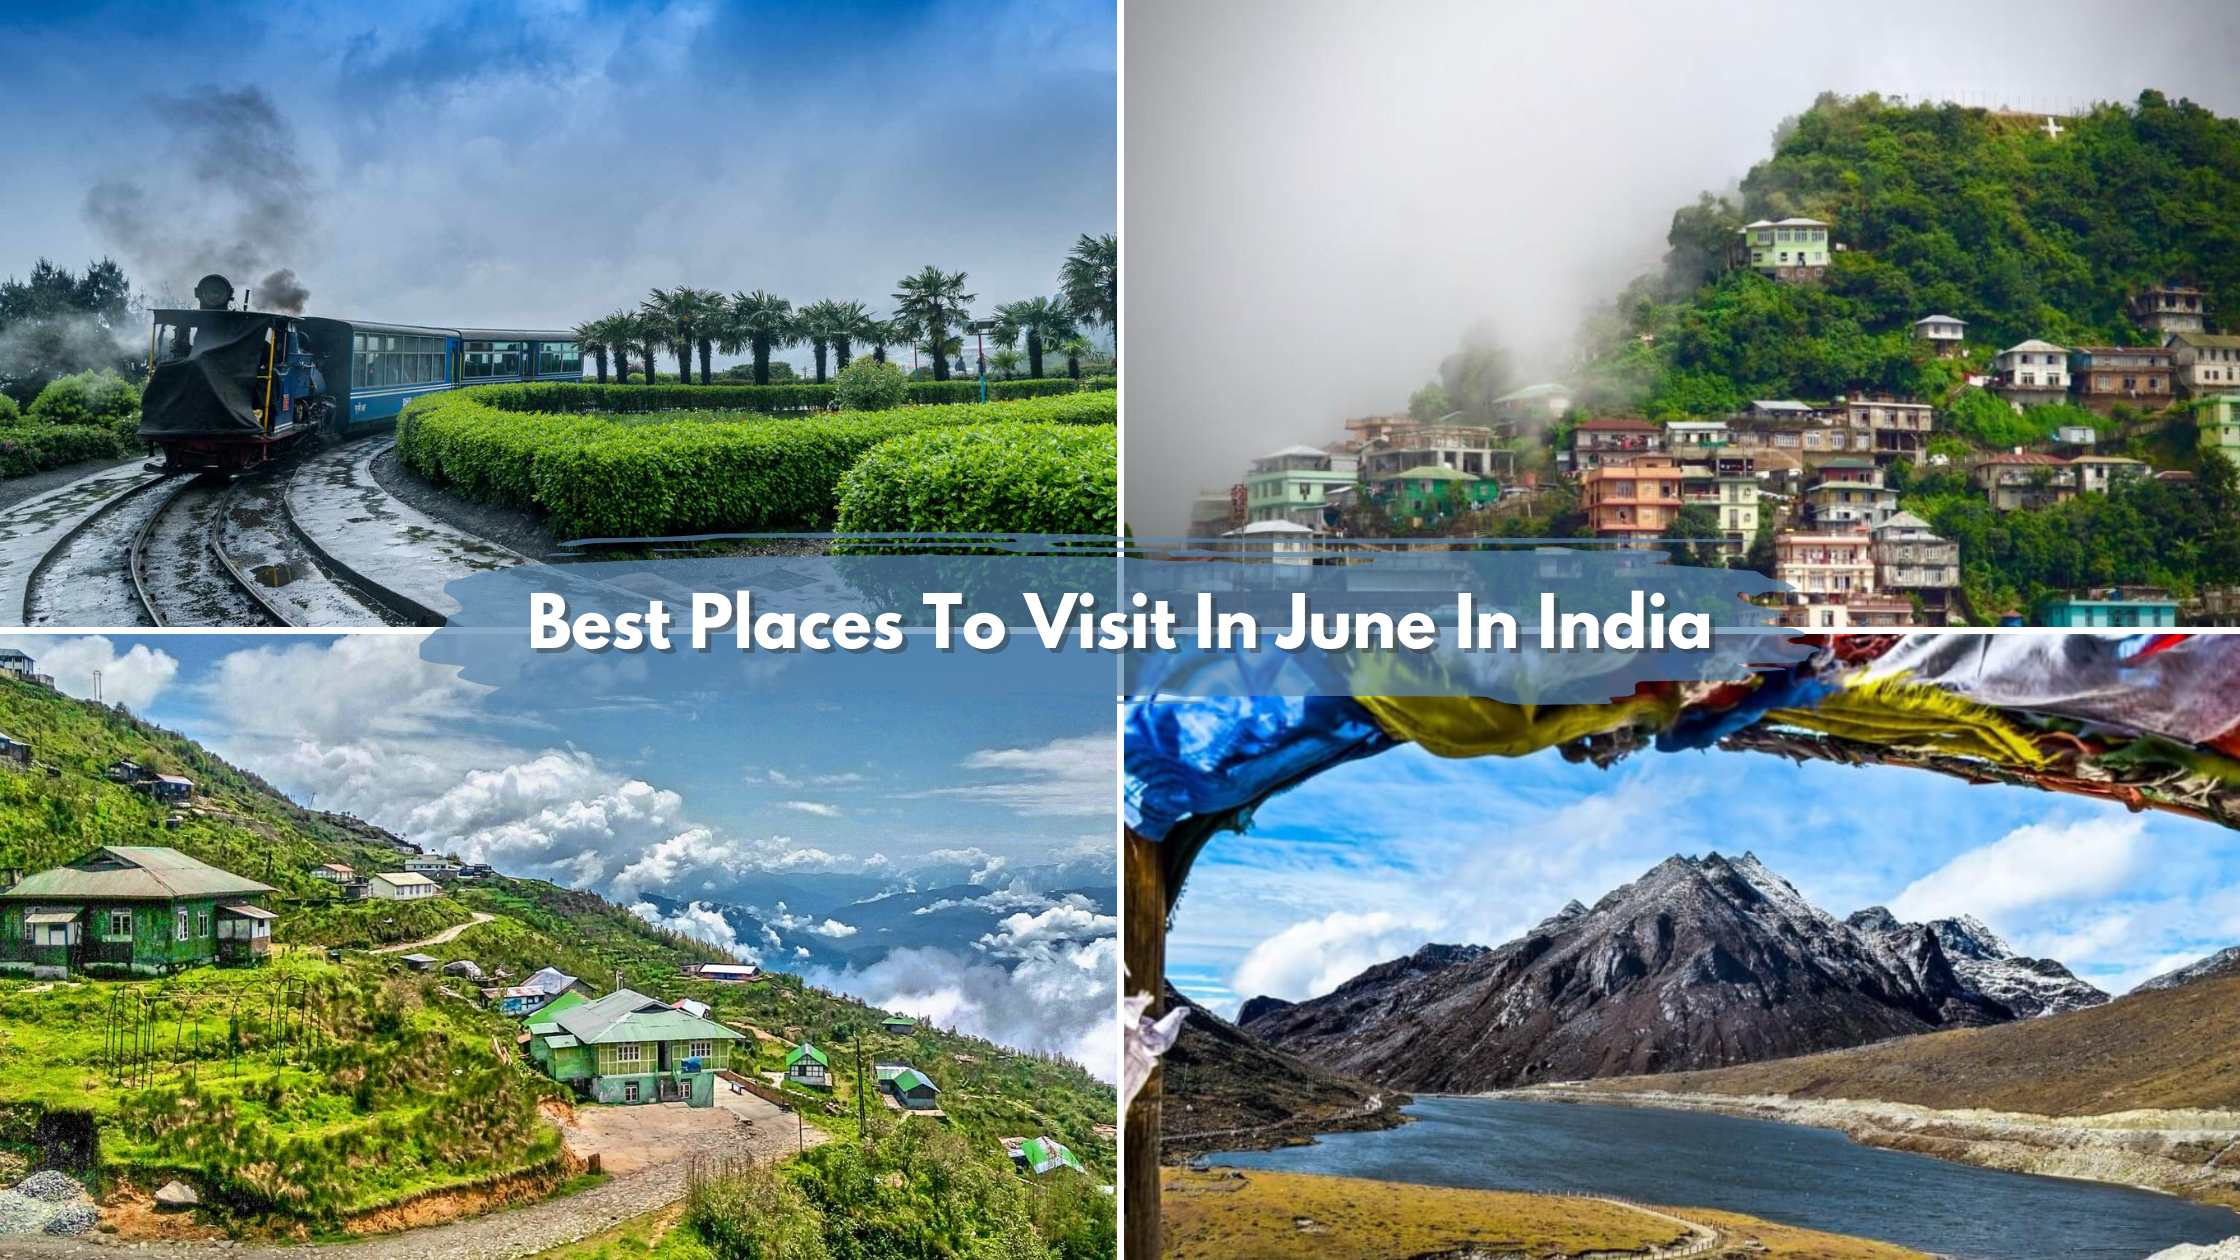 Best places to visit in June